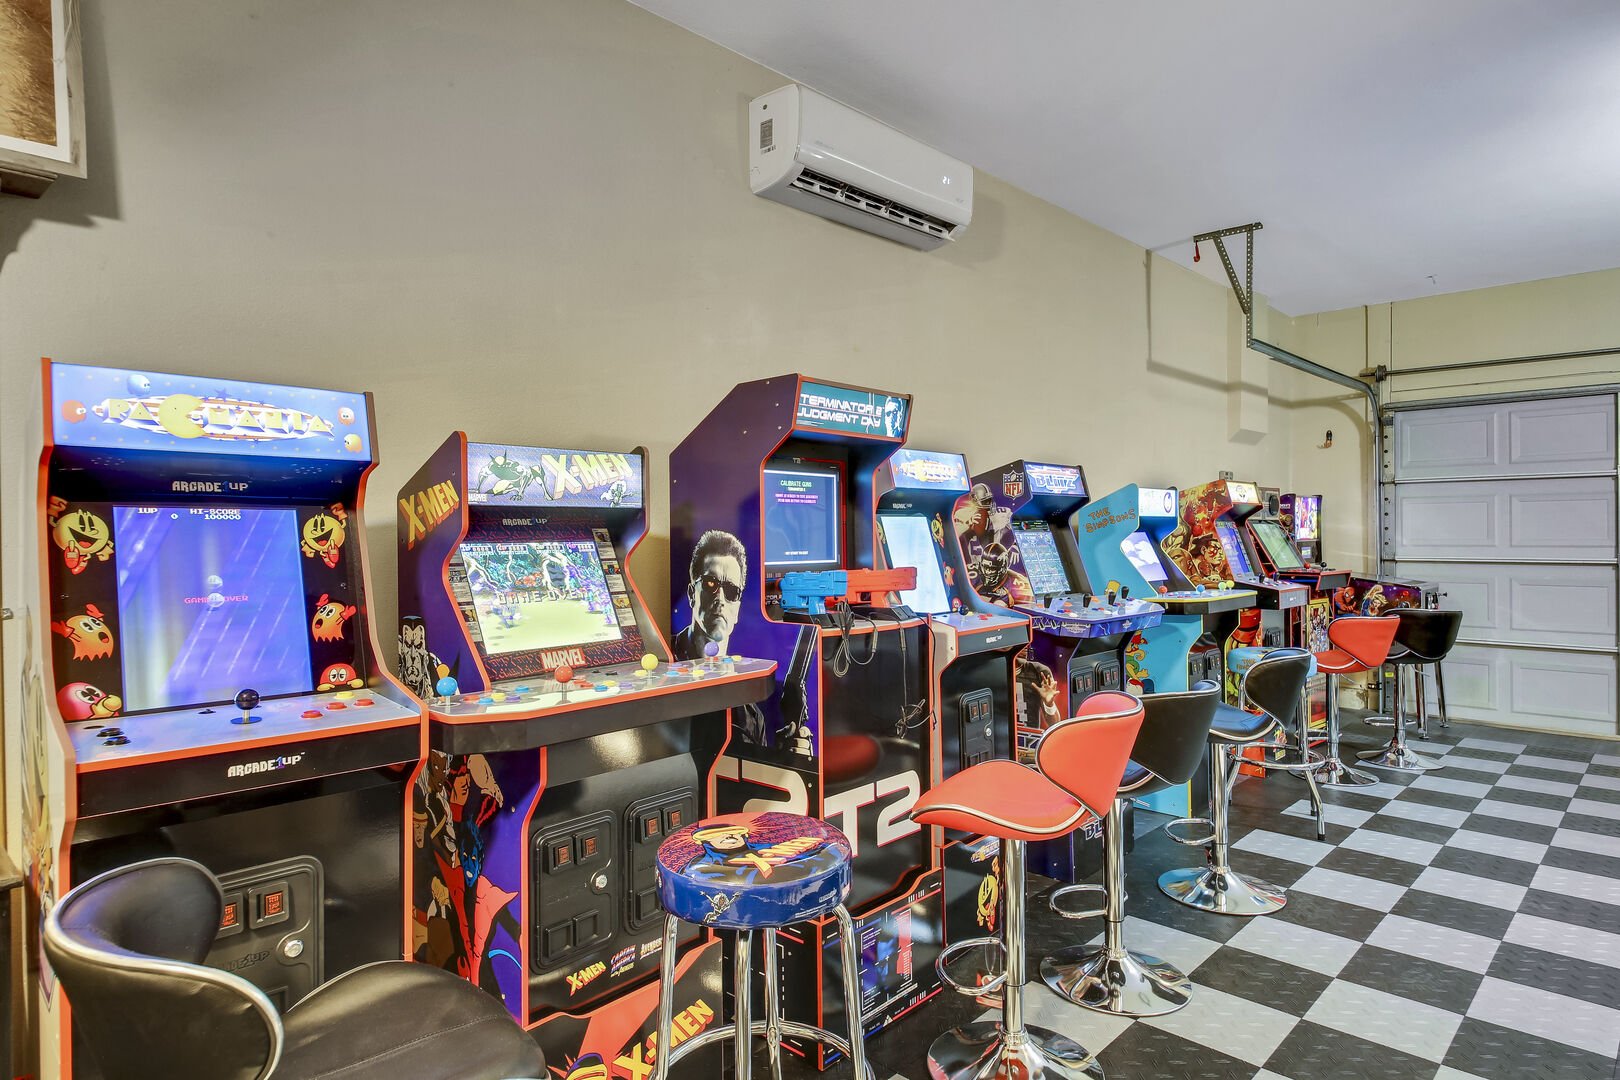 Experience non-stop excitement in our game room which was formerly a garage. Here, you'll find 8 arcade games featuring classics like The Simpsons, Street Fighter 2, X-Men, Terminator 2, NFL Blitz, Retro Mania, and many more, with most offering multiplayer options for friendly competition.